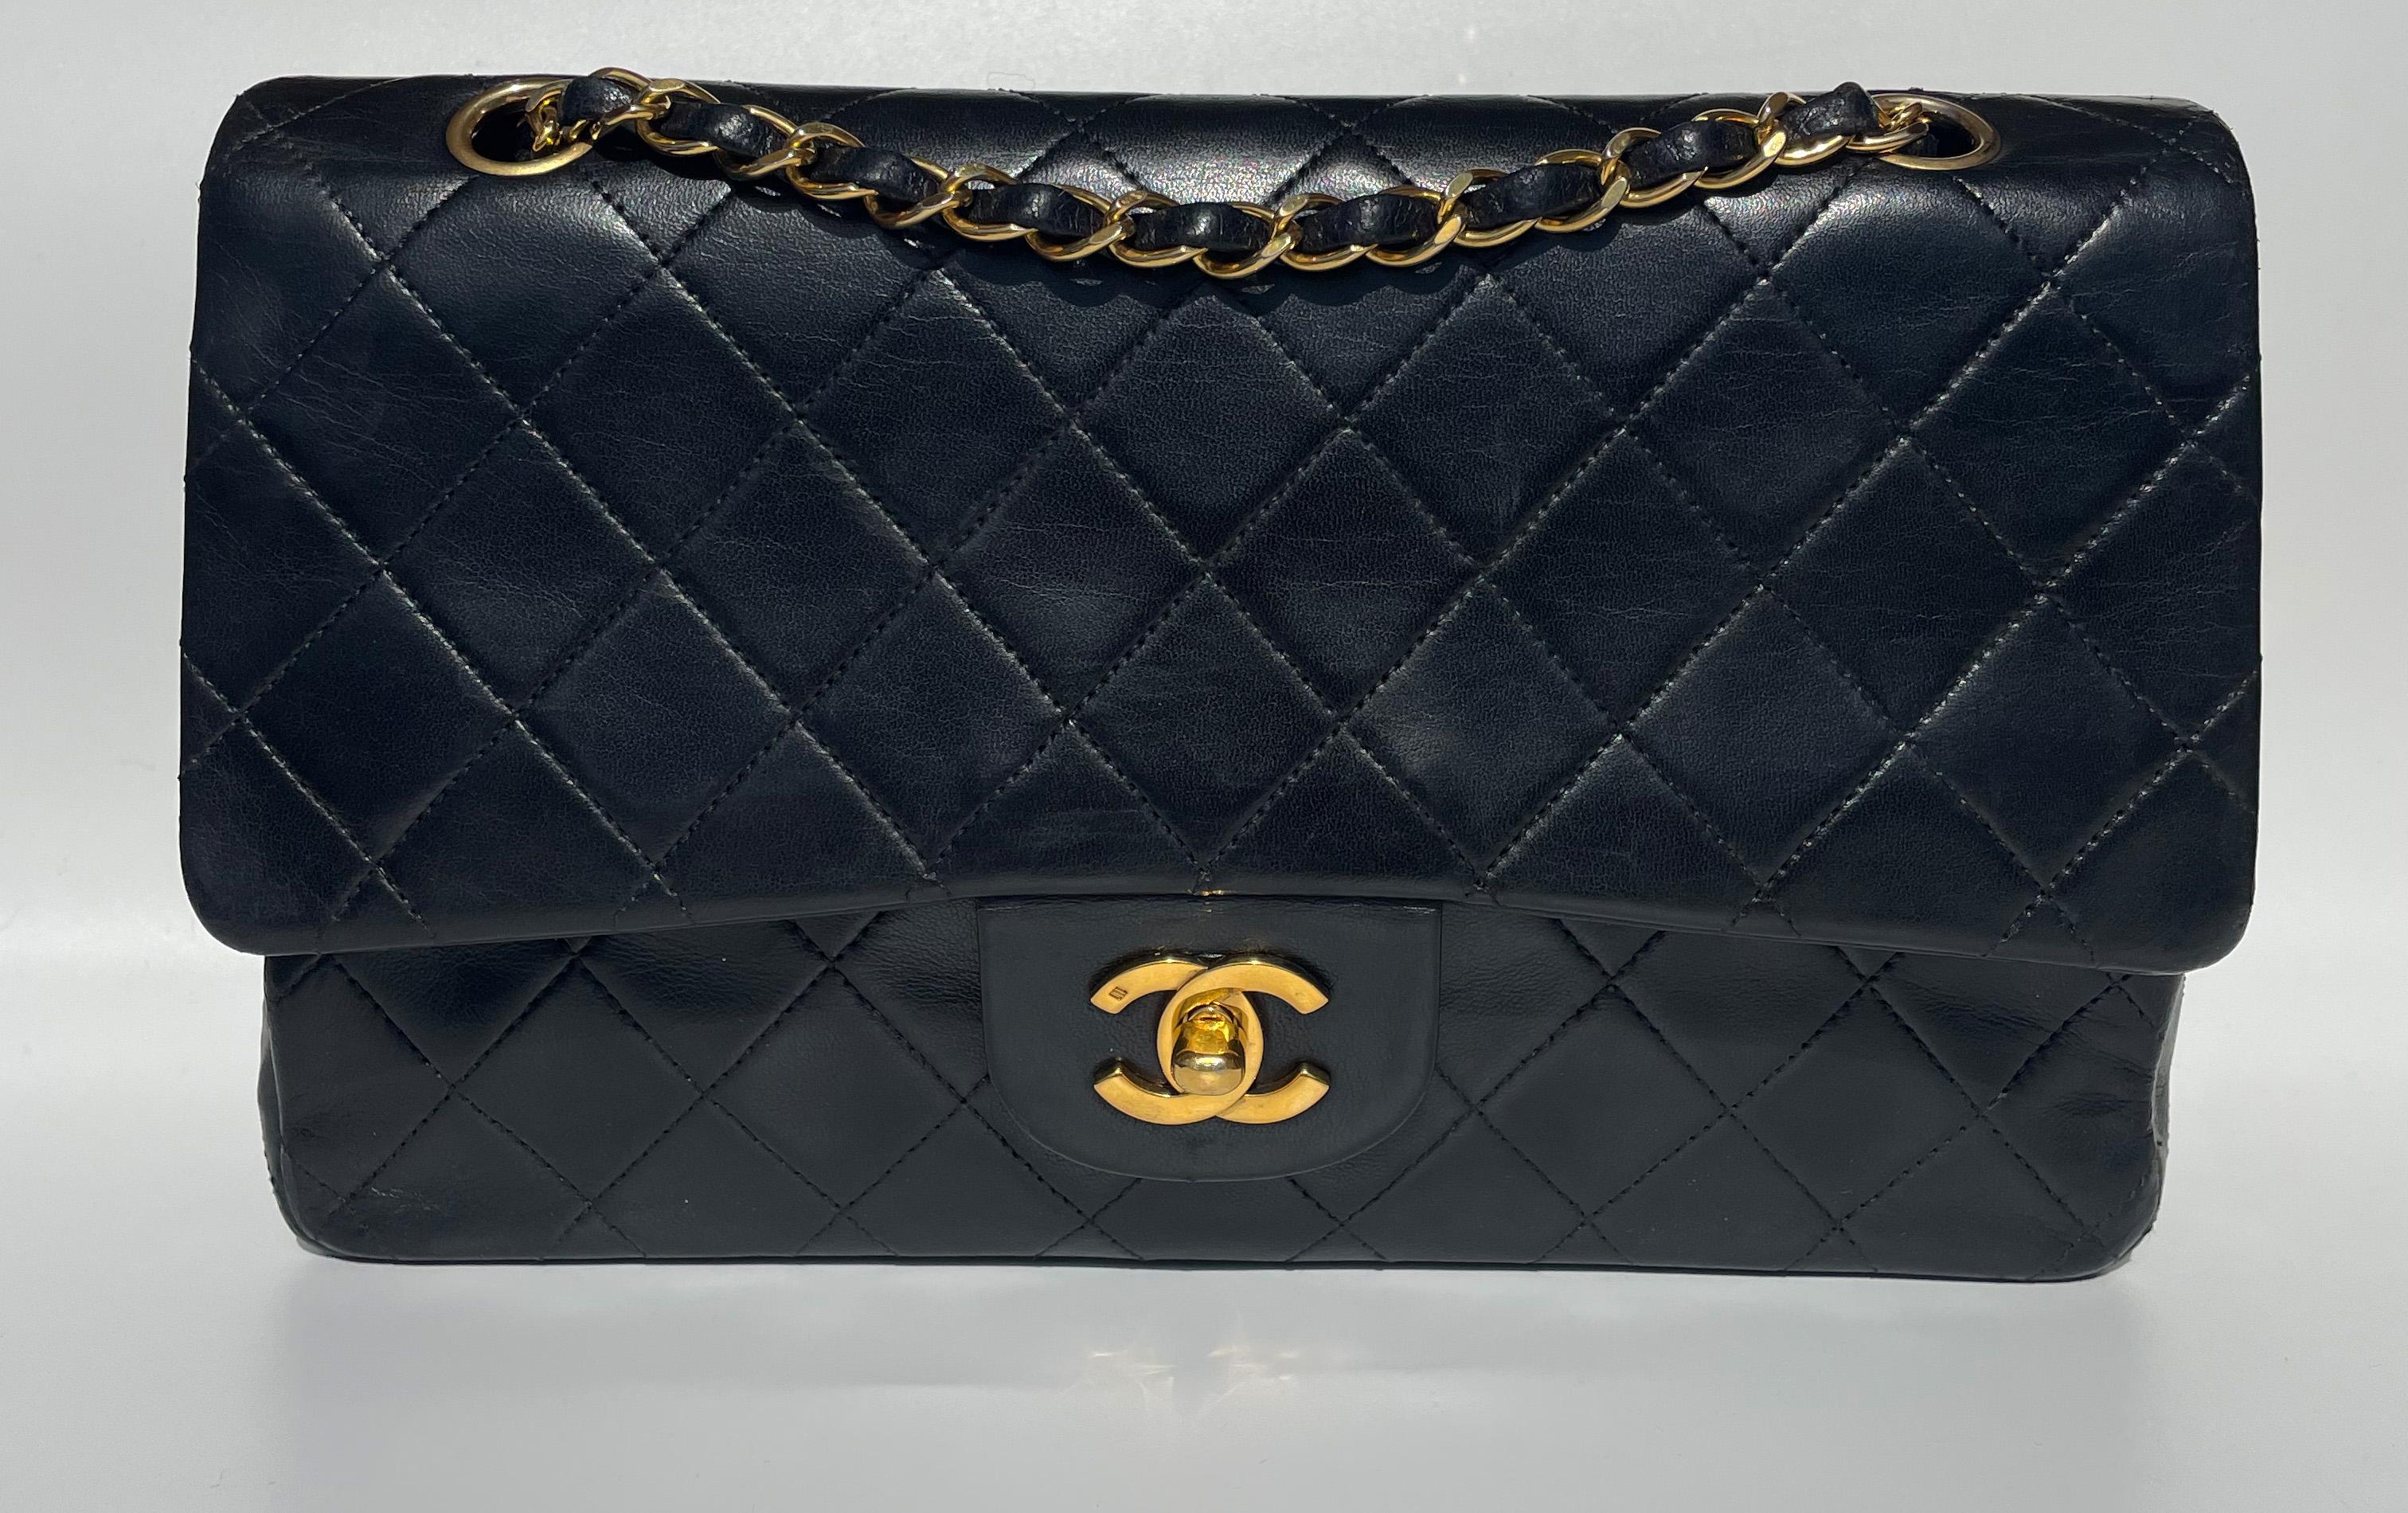 Chanel Classique handbag in black lambskin and 24-carat plated gold metal In Good Condition For Sale In CANNES, FR